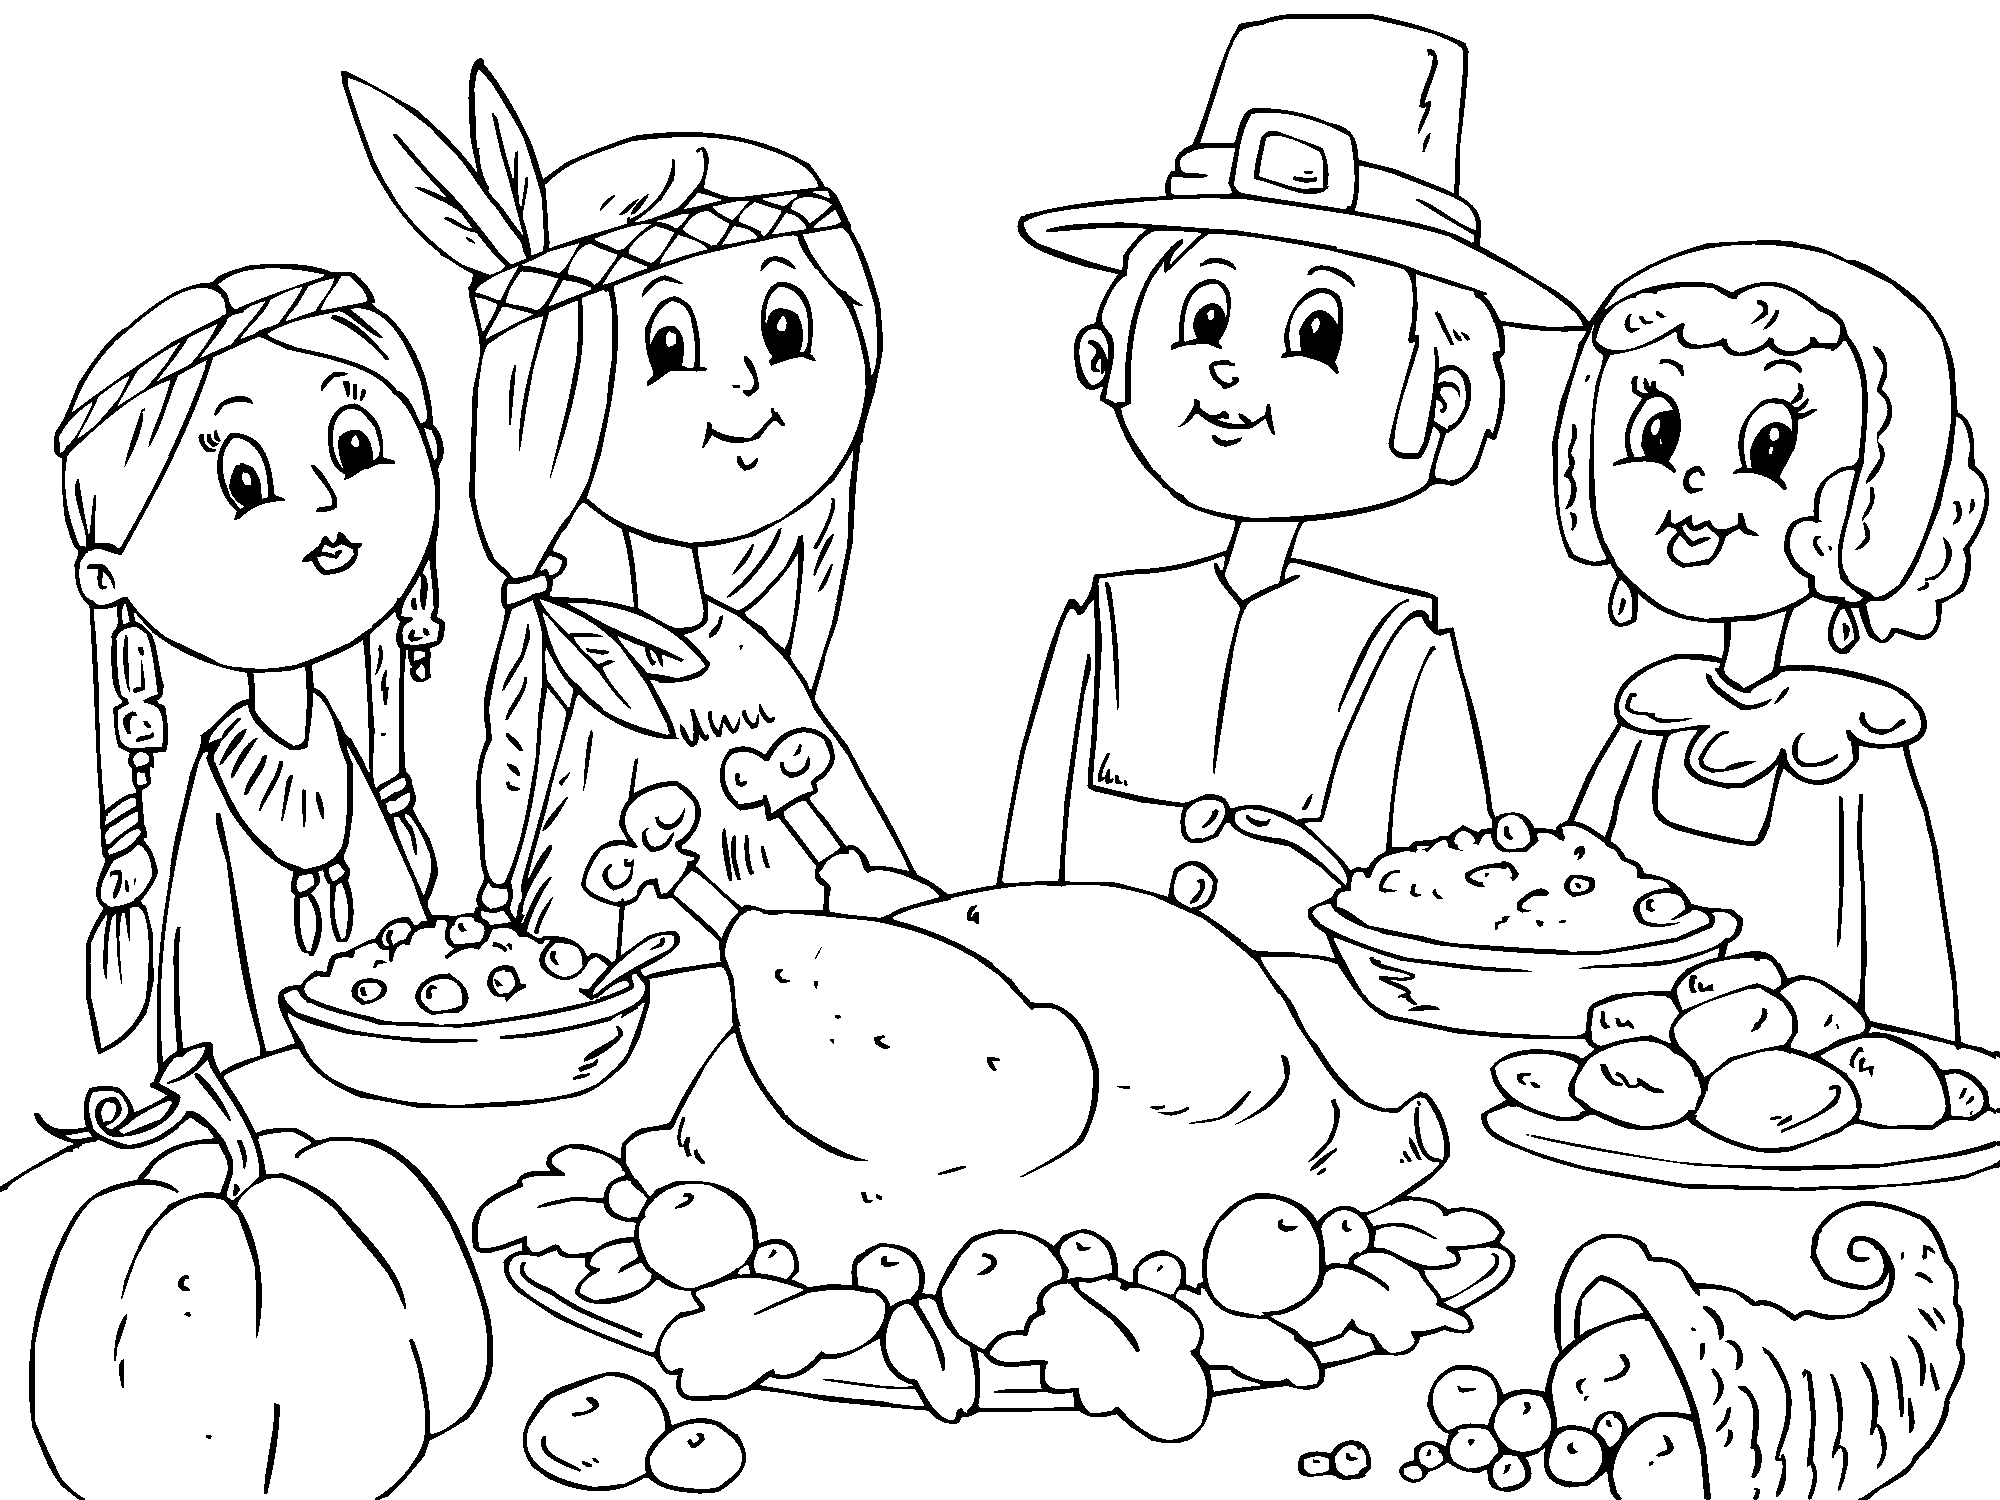 Thanksgiving day coloring pages | Crafts and Worksheets ...